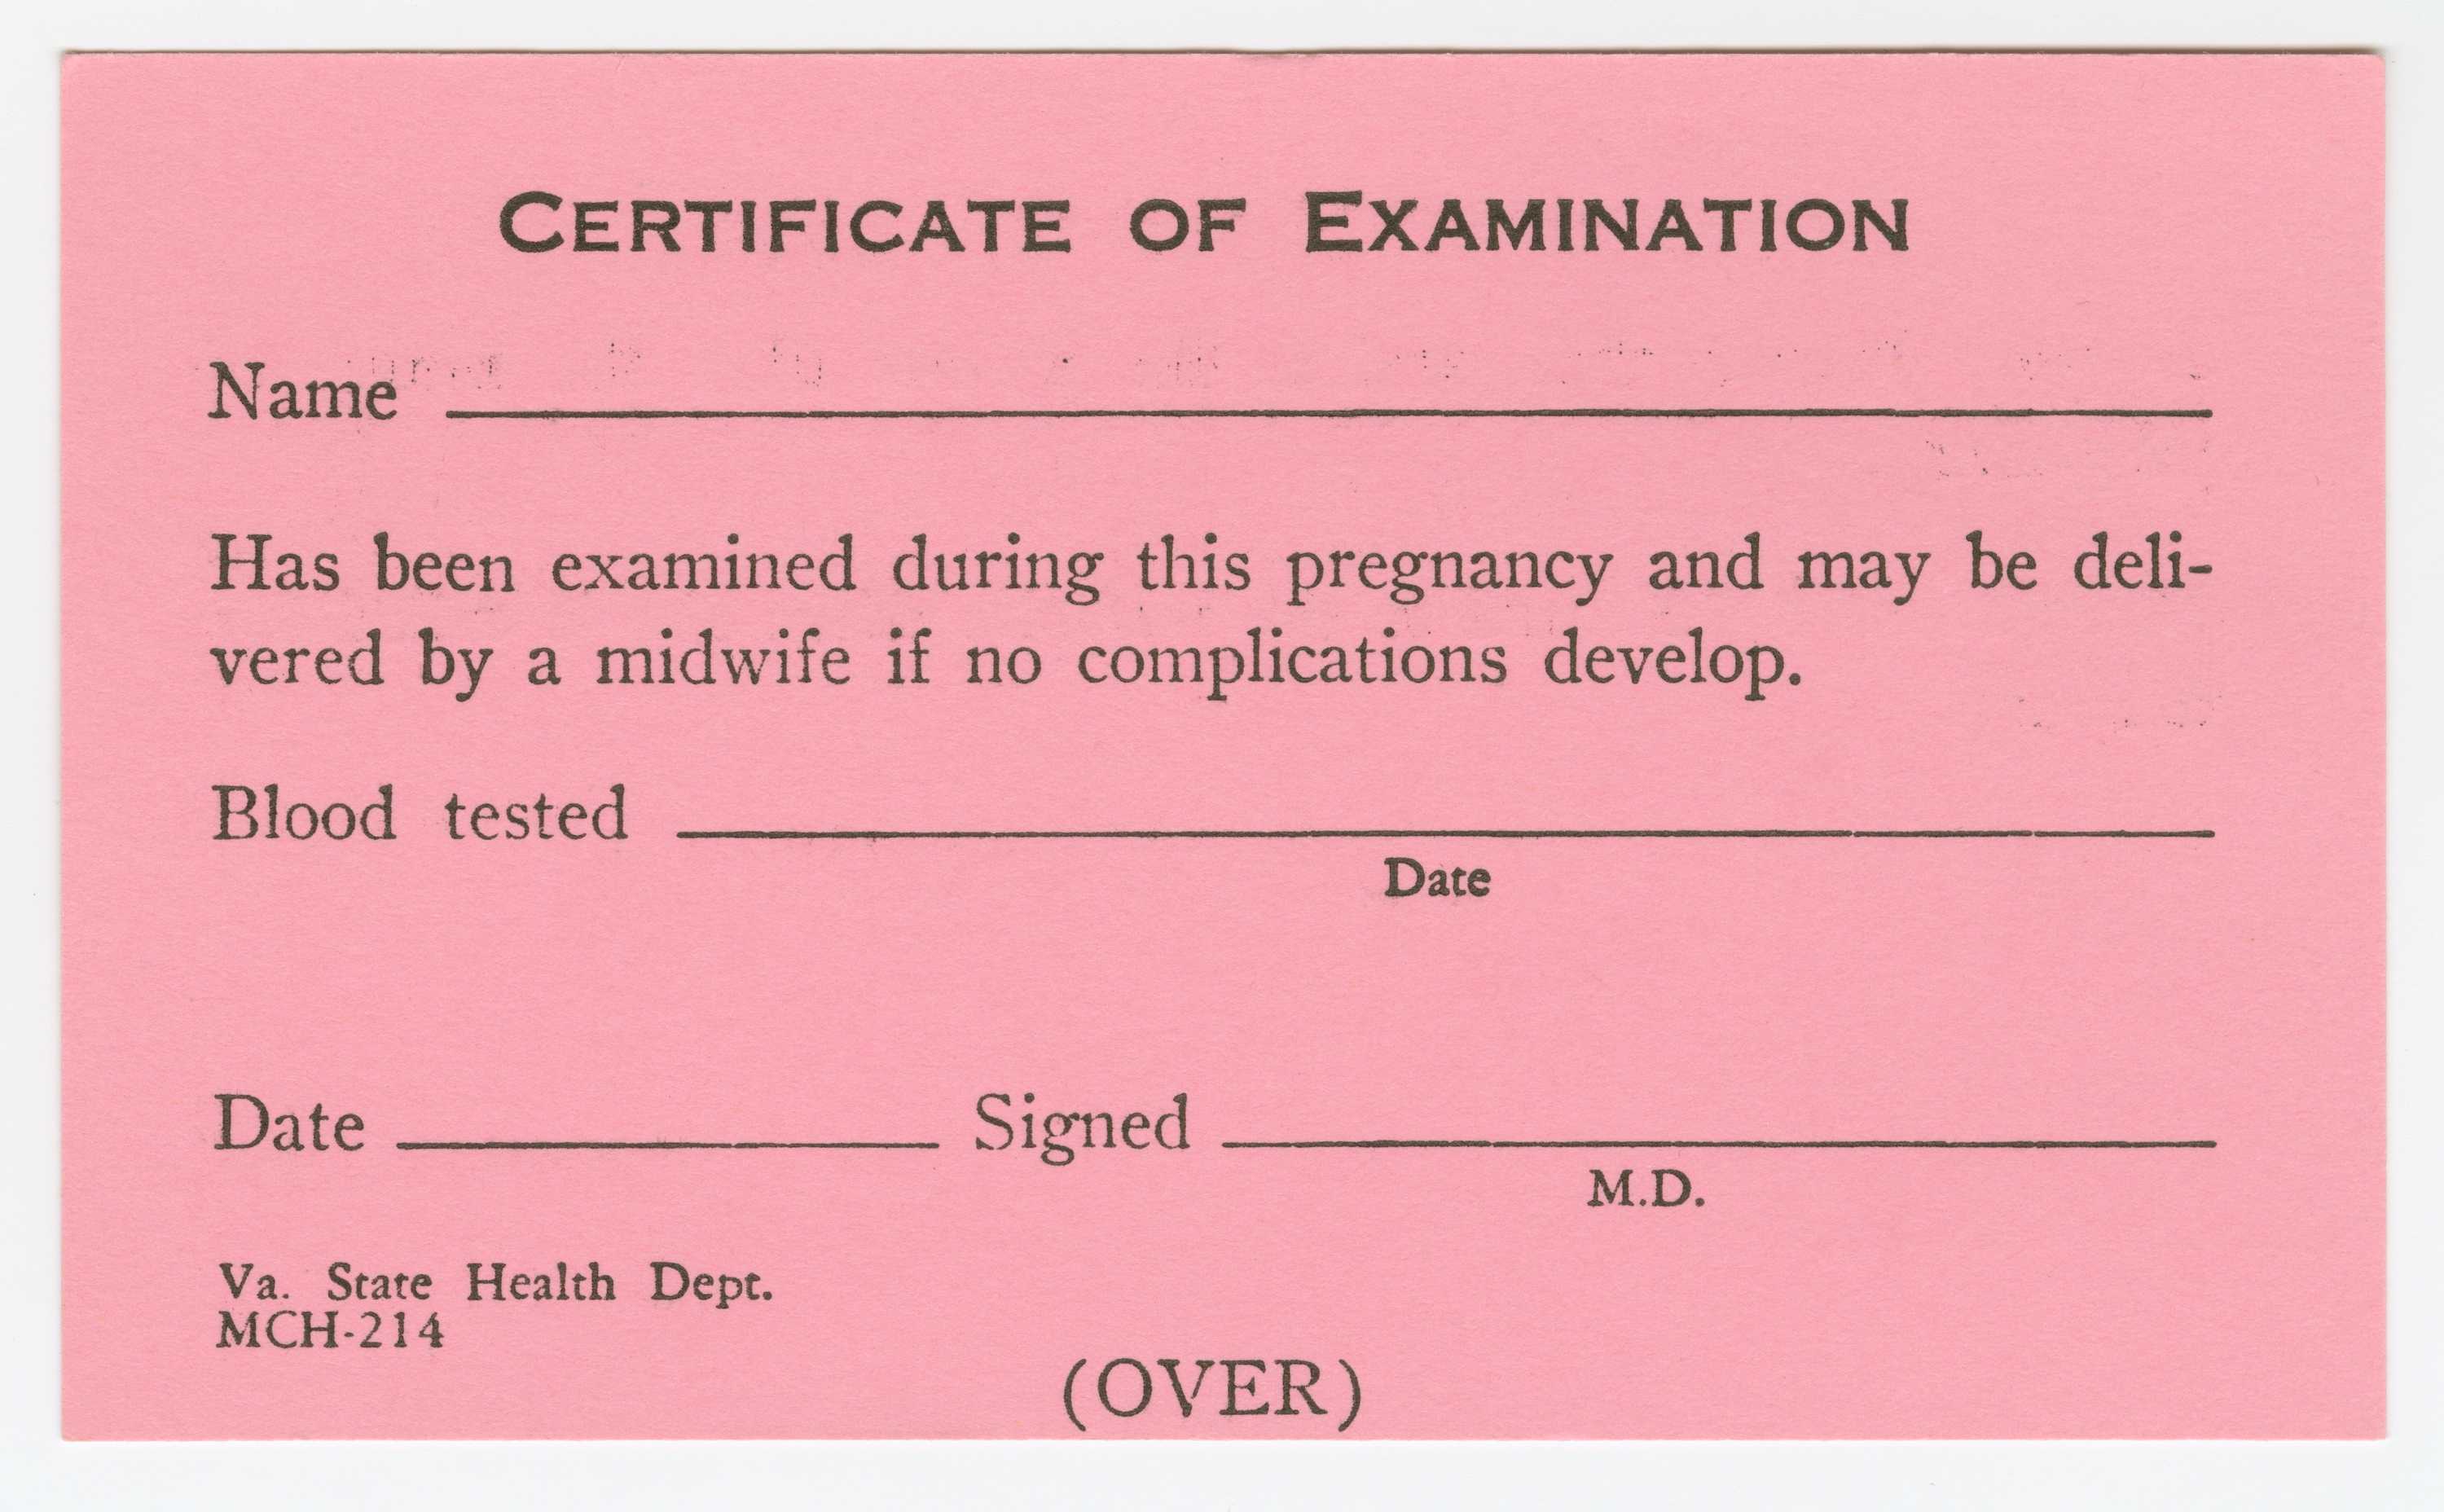 A blank, unused Certificate of Examination card printed by the Virginia State Health Department and used by the midwife Amanda Carey Carter.